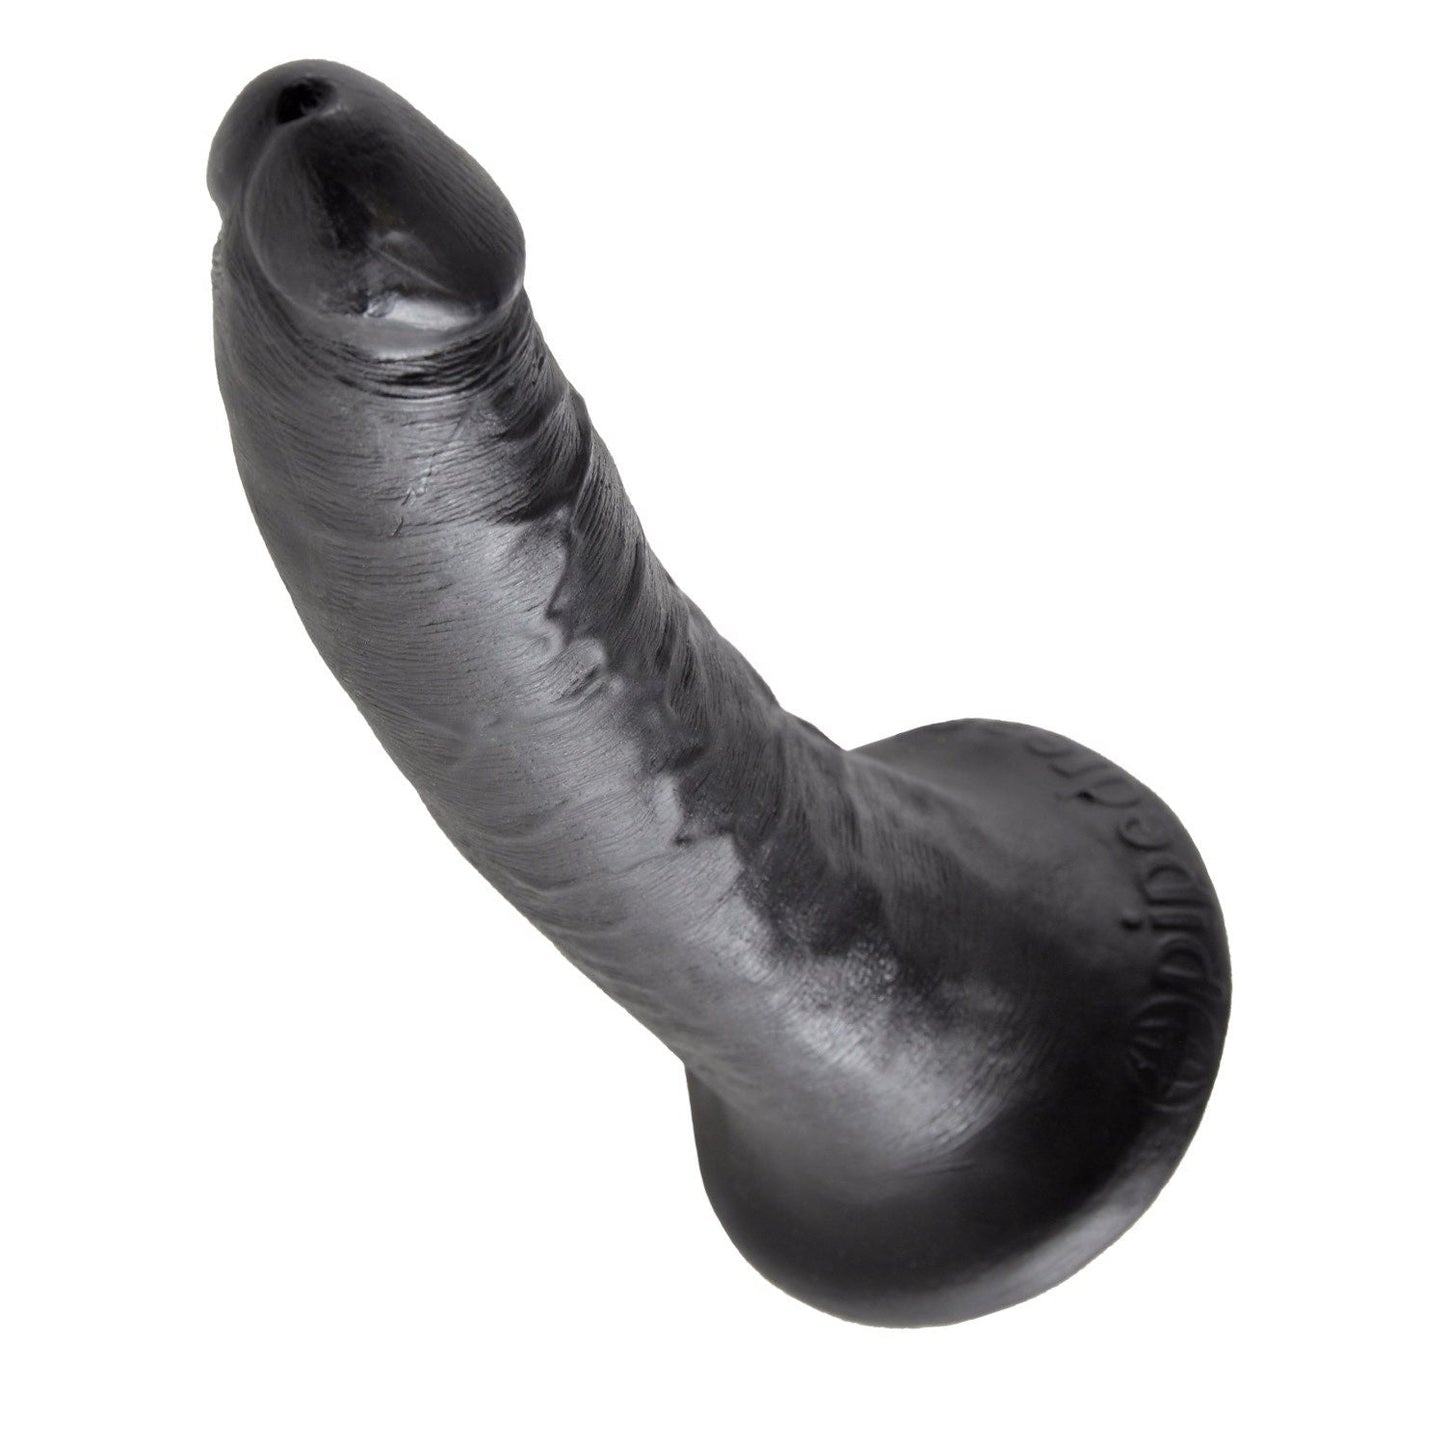 7" Cock - Black 17.8 cm (7") Dong